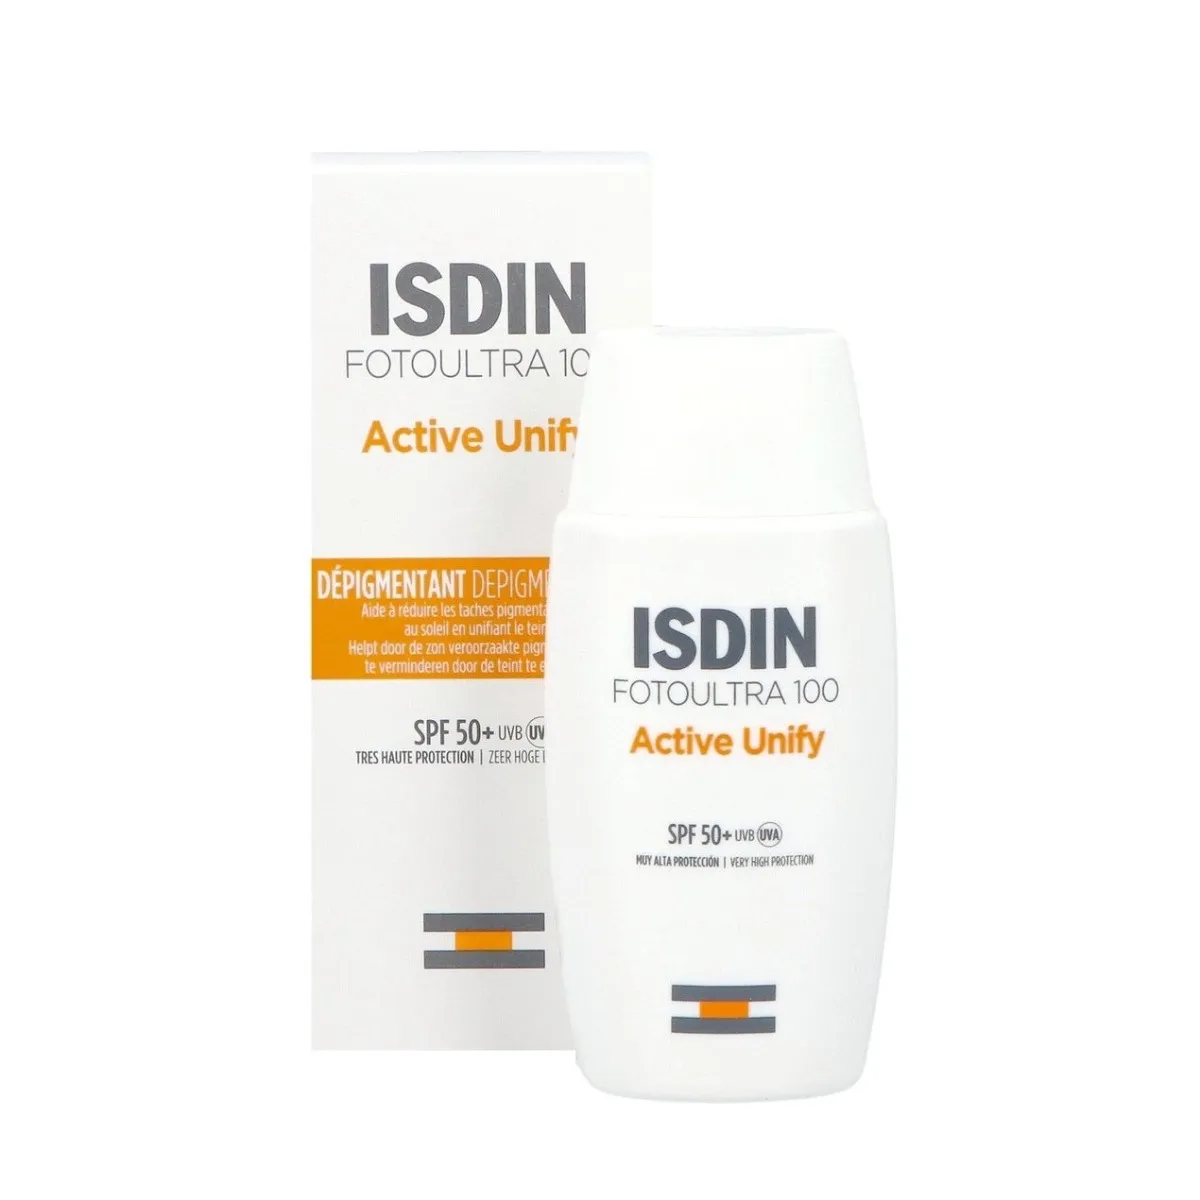 isdin fotoultra 100 active unify fusion fluid spf50+ 50ml 8429420093577